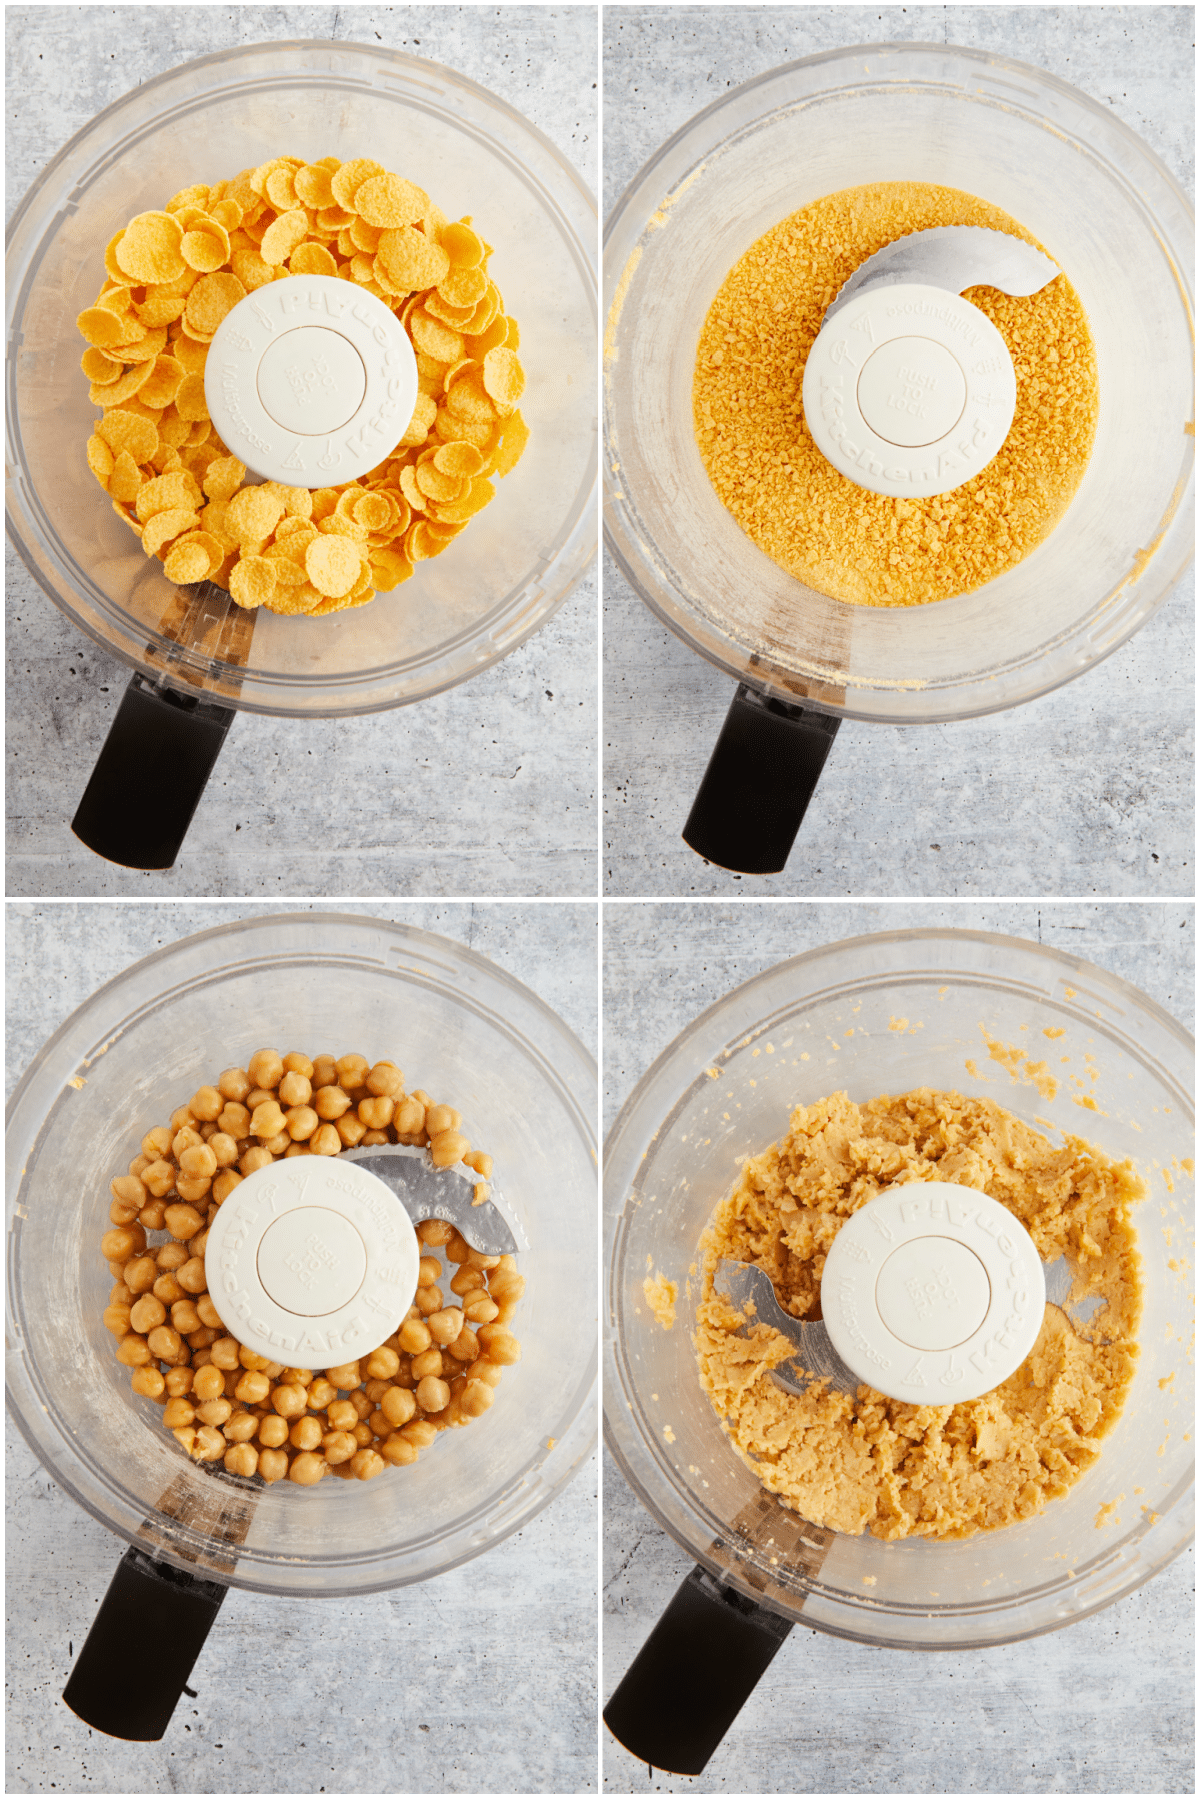 Four image collage showing how to make vegan chicken wings: add corn flakes to food processor and process to a crumb, add chickpeas and process.